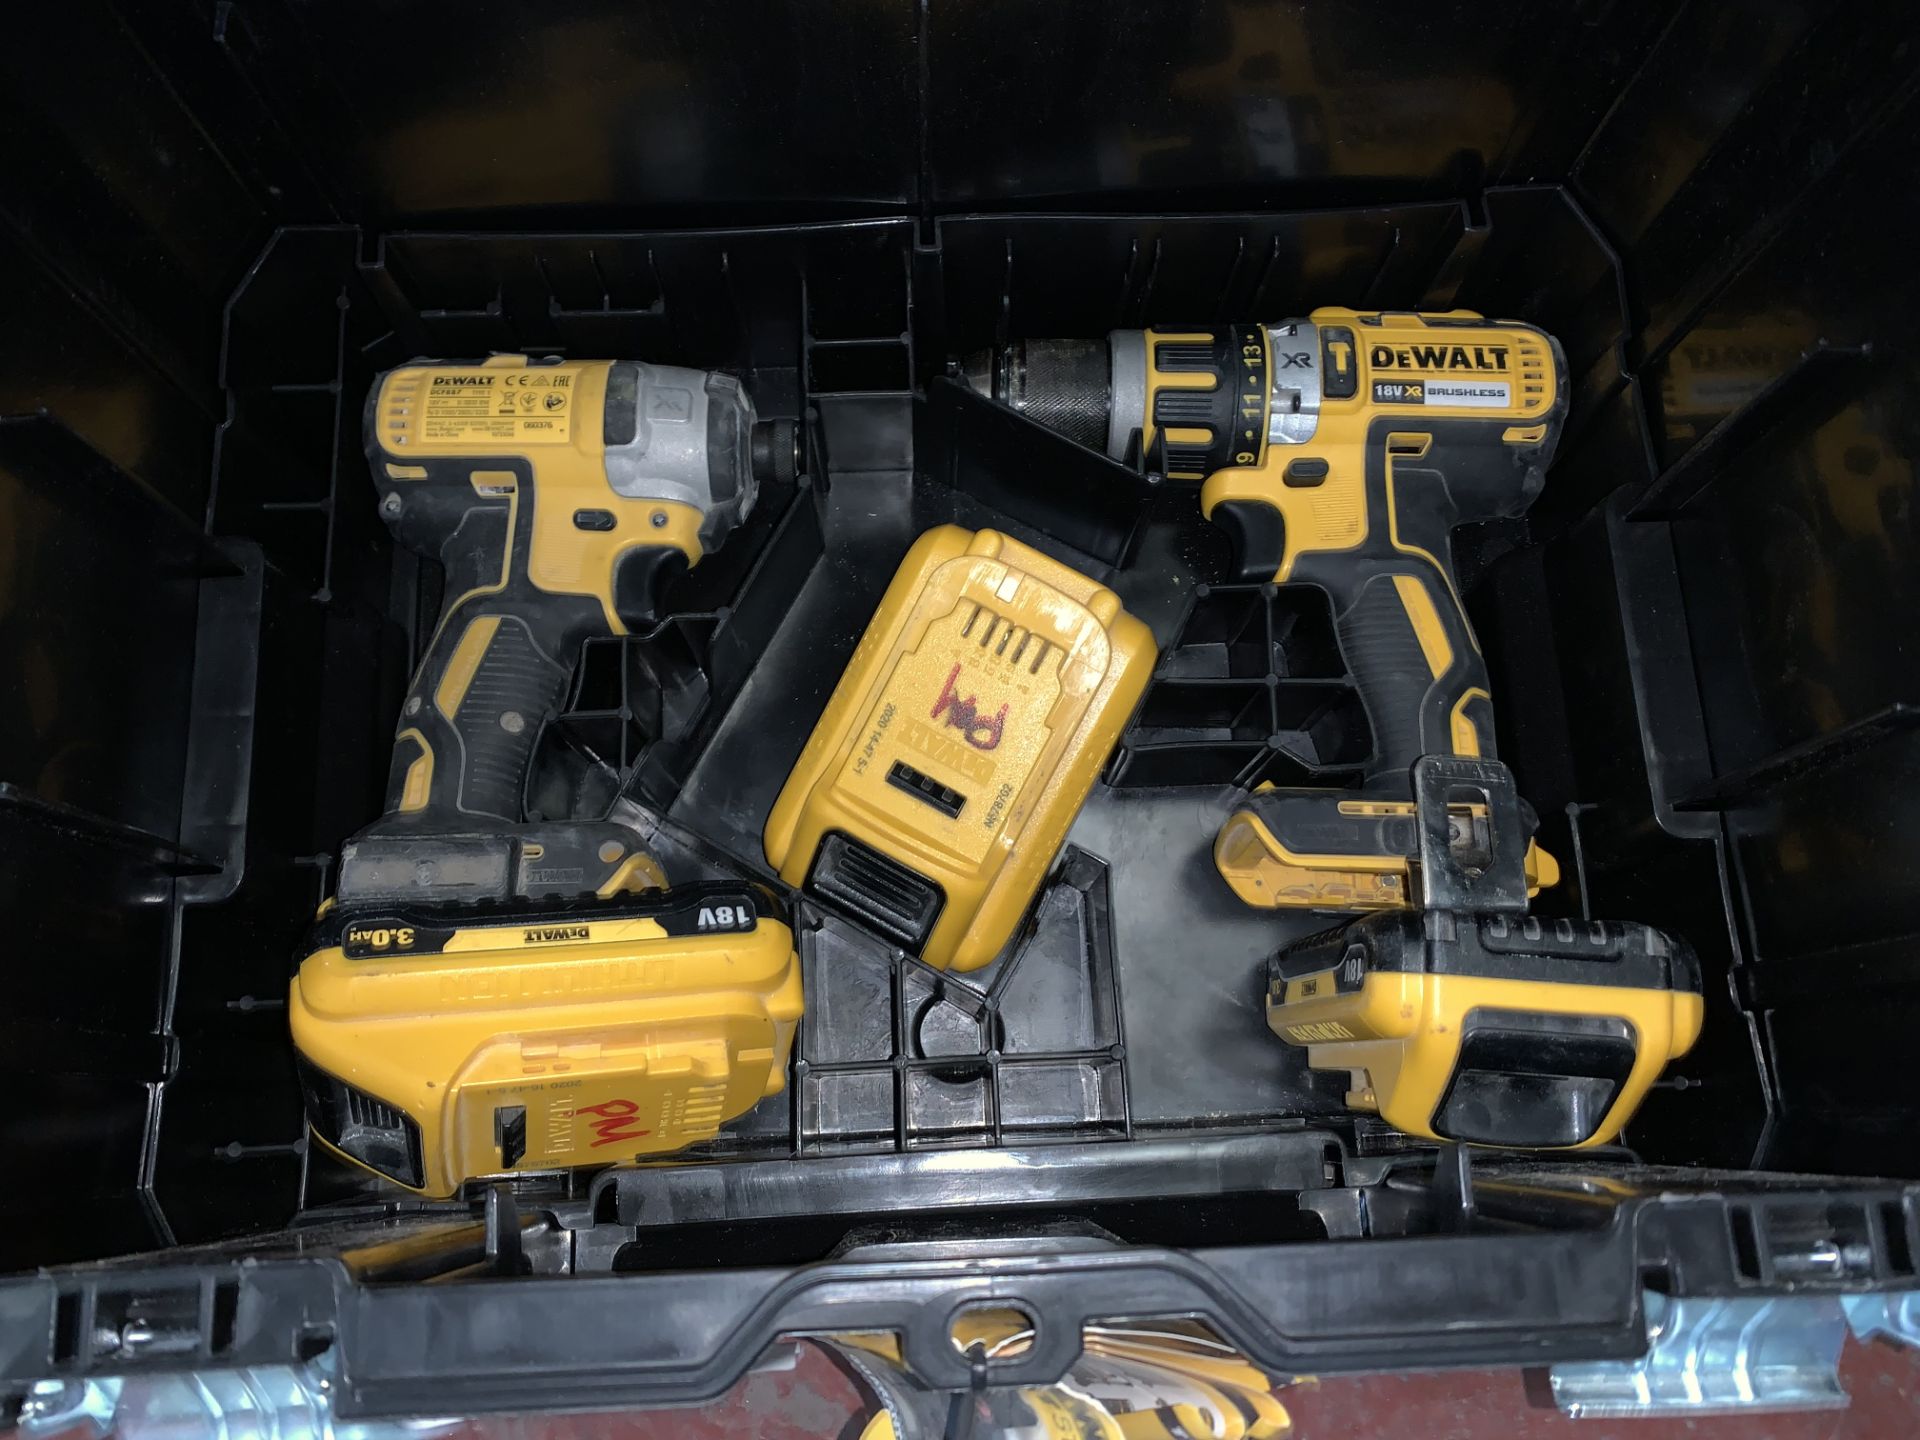 DEWALT TWIN PACK CORDLESS BRUSHLESS COMBI DRILL AND IMPACT DRIVER COMES WITH 3 BATTERIES, CHARGER